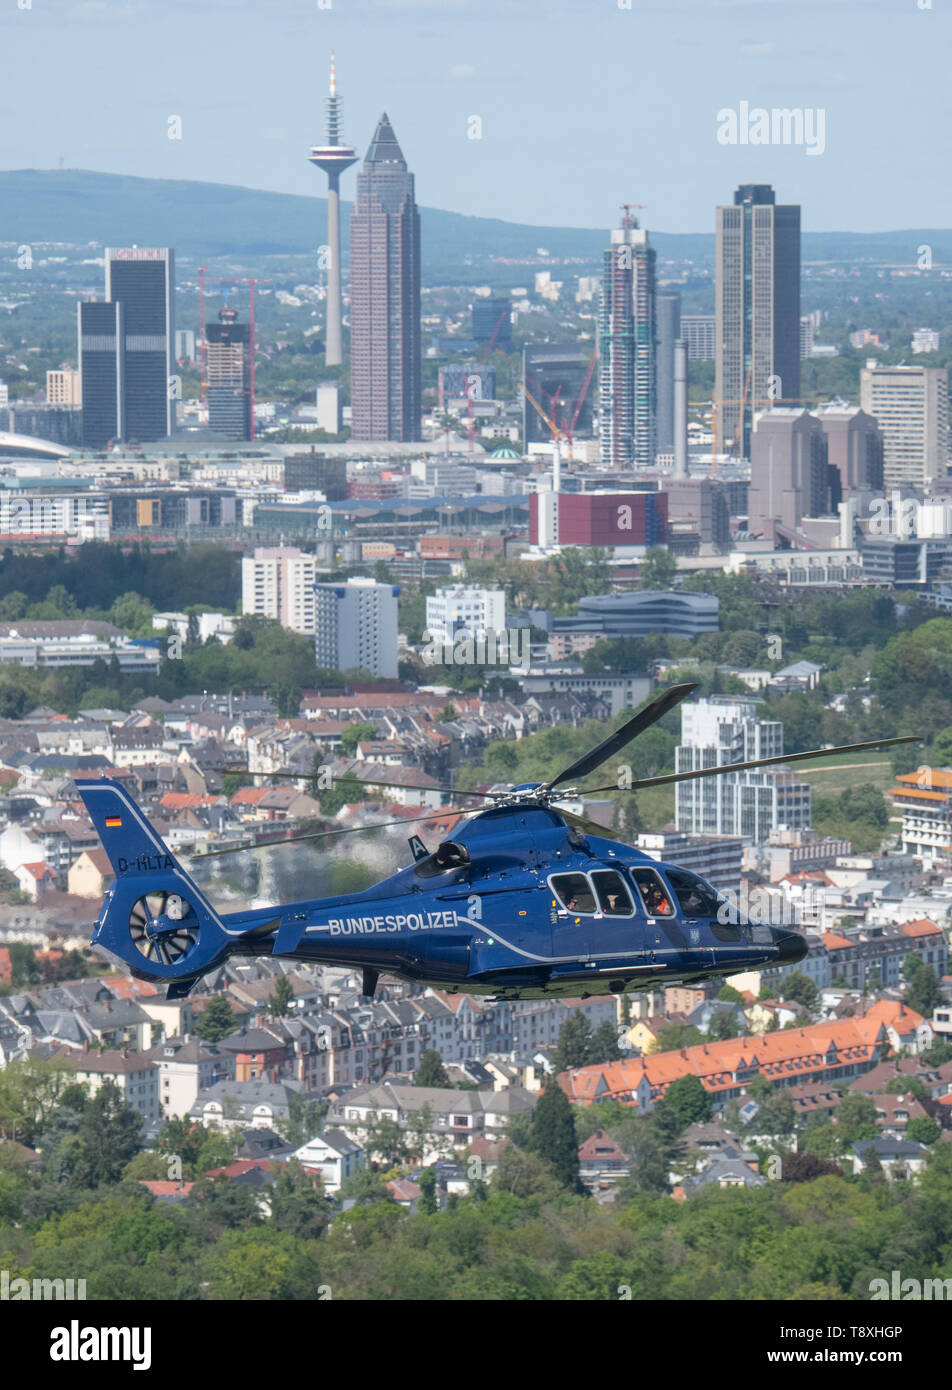 15 May 2019, Hessen, Frankfurt/Main: A Eurocopter EC 155 helicopter of the German Federal Police flies by in front of Frankfurt's bank skyline. The helicopters are ready for action within a very short time and can be used to prosecute perpetrators on the ground, to relocate special units or to monitor railway lines and airports. Photo: Boris Roessler/dpa Stock Photo